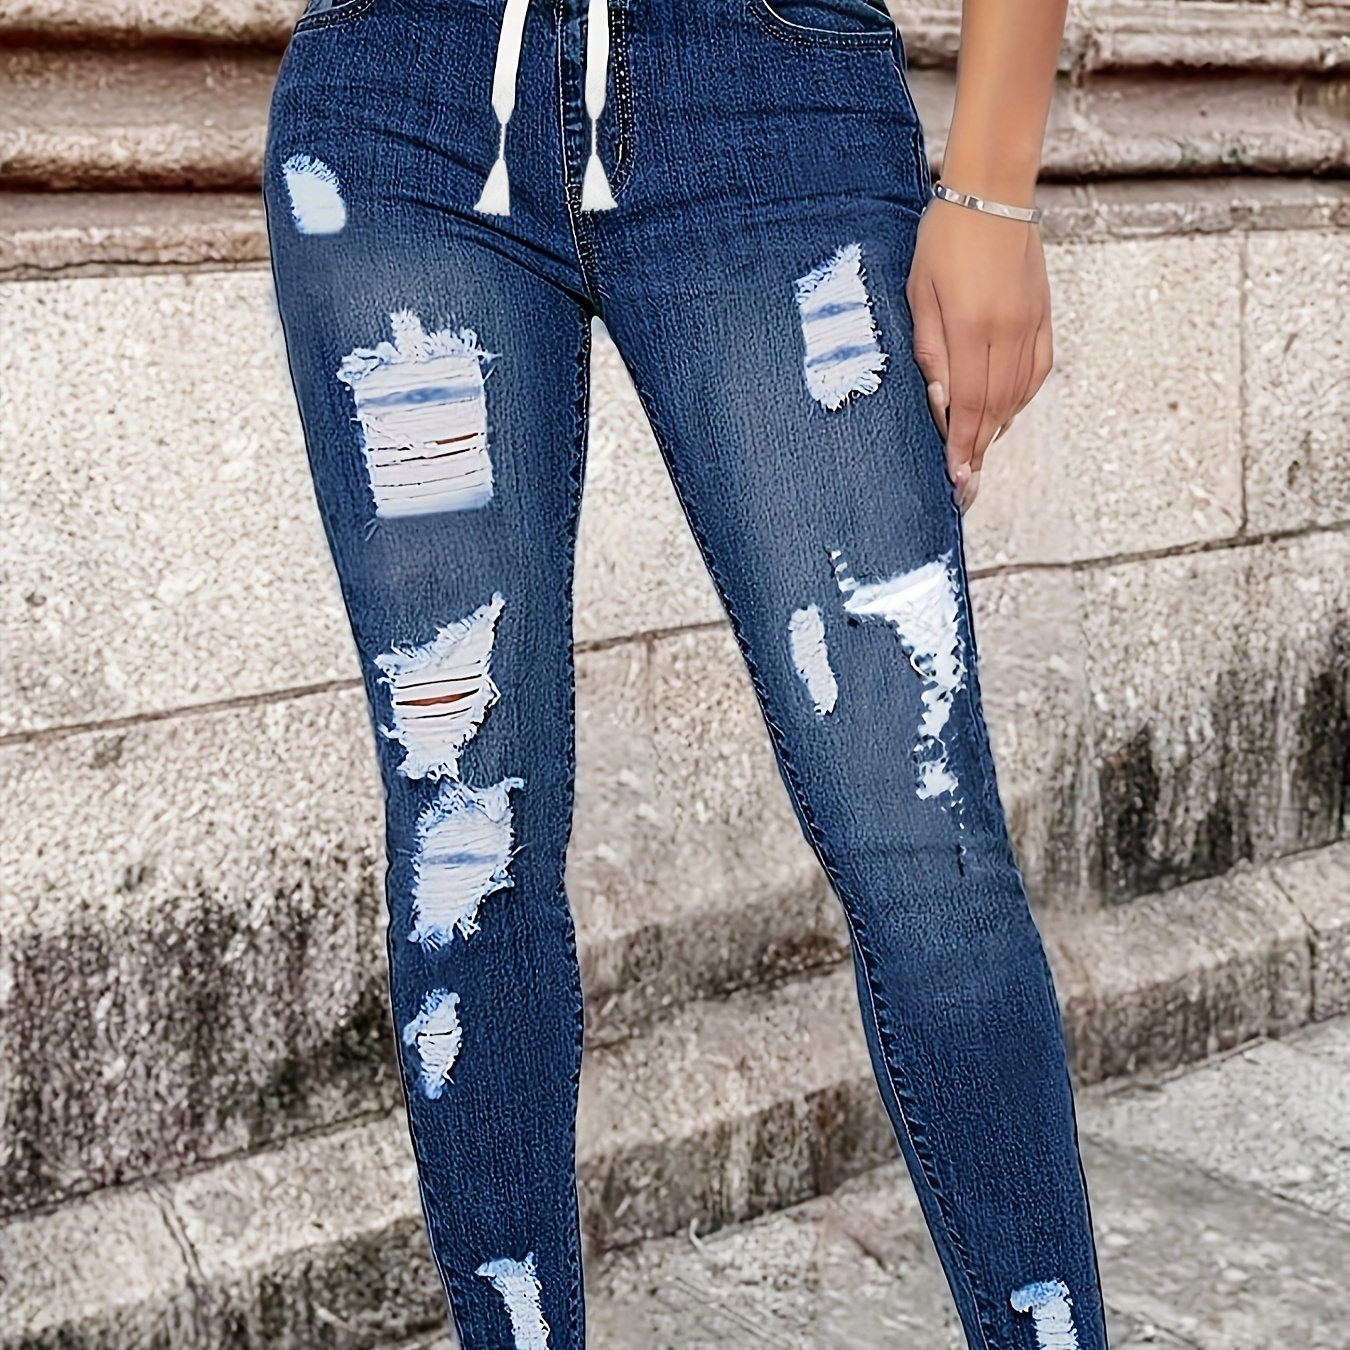 

Blue Elastic Waist Skinny Jeans, Ripped Holes Frayed Hem Mid-stretch Tight Jeans, Women's Denim Jeans & Clothing